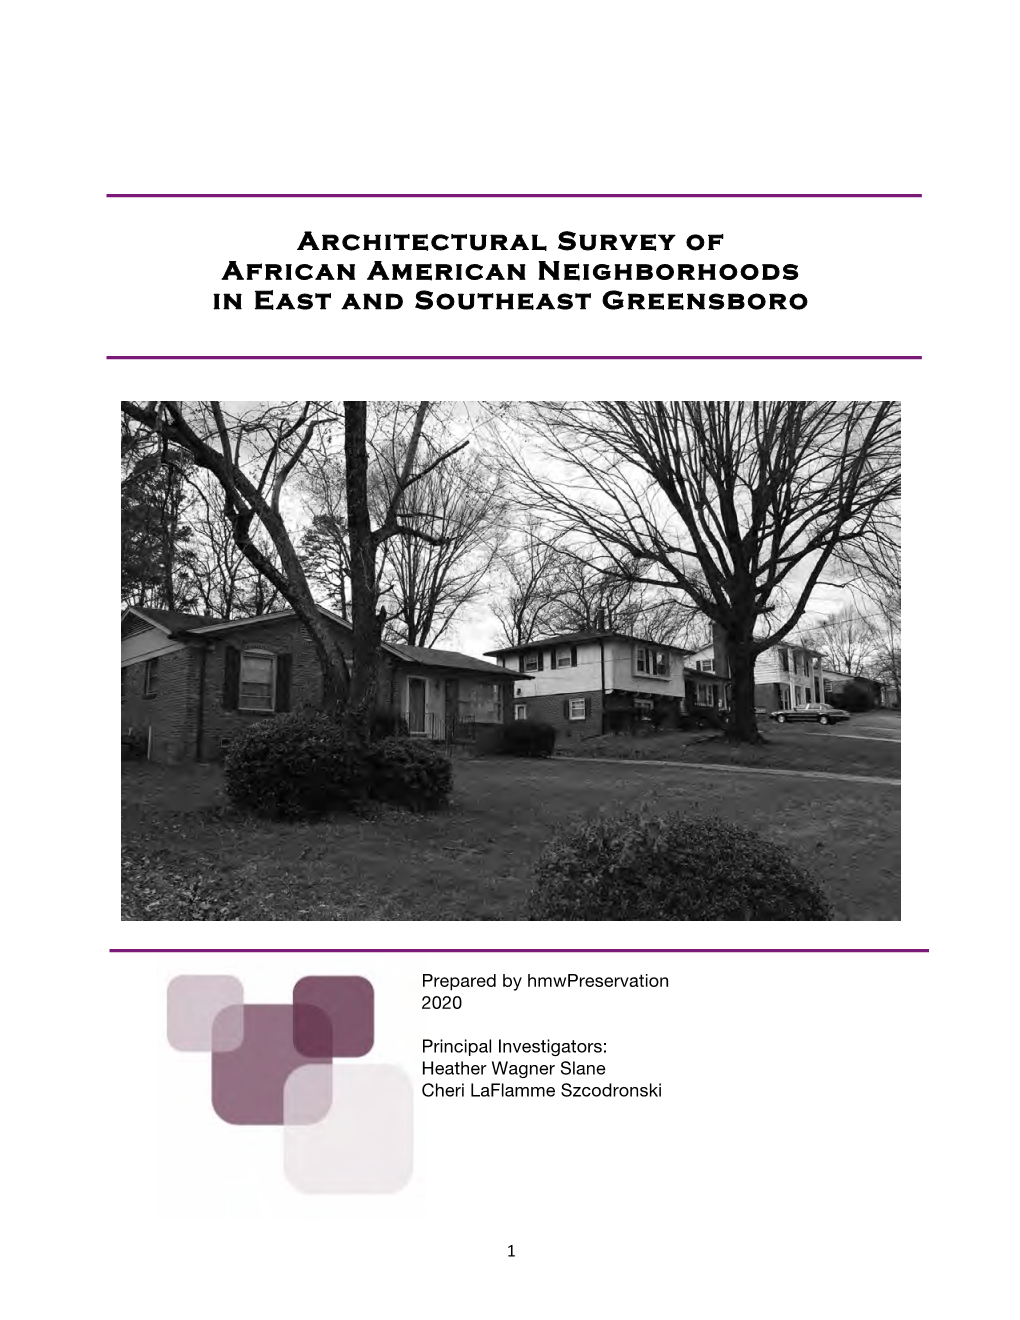 Architectural Survey of African American Neighborhoods in East and Southeast Greensboro